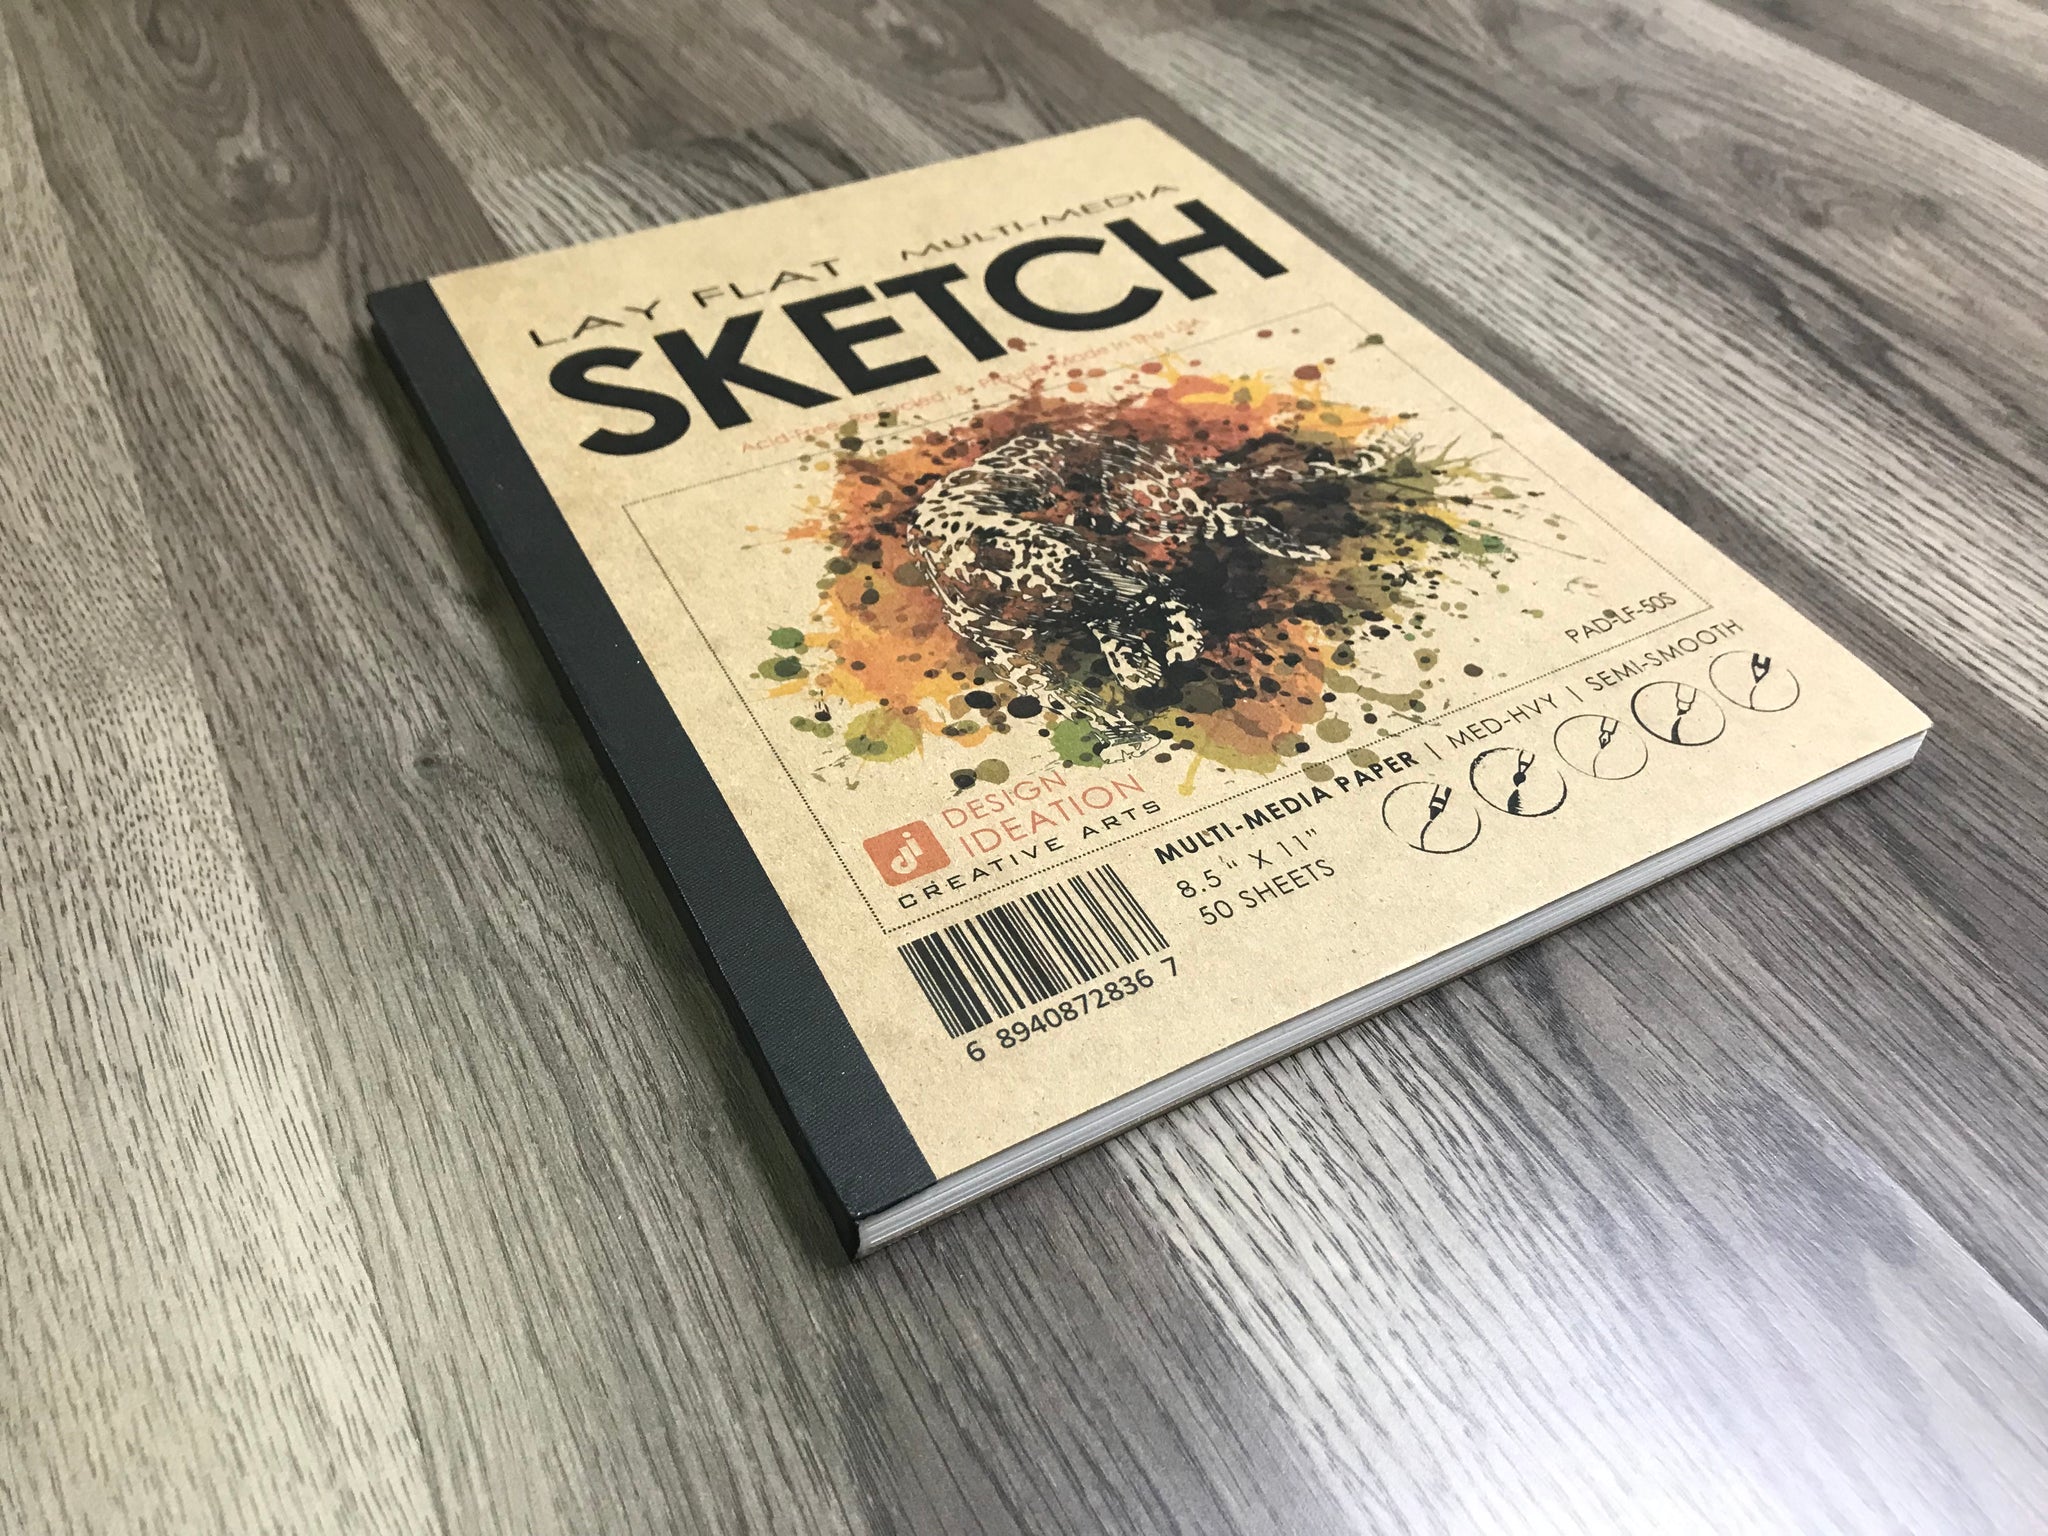  Design Ideation Lay Flat Multi Media Sketchbook. Removable  Sheet Drawing Book for Pencil, Ink, Marker, Charcoal and Watercolor Paints.  Great for Art, Design and Education. 8.5 x 11